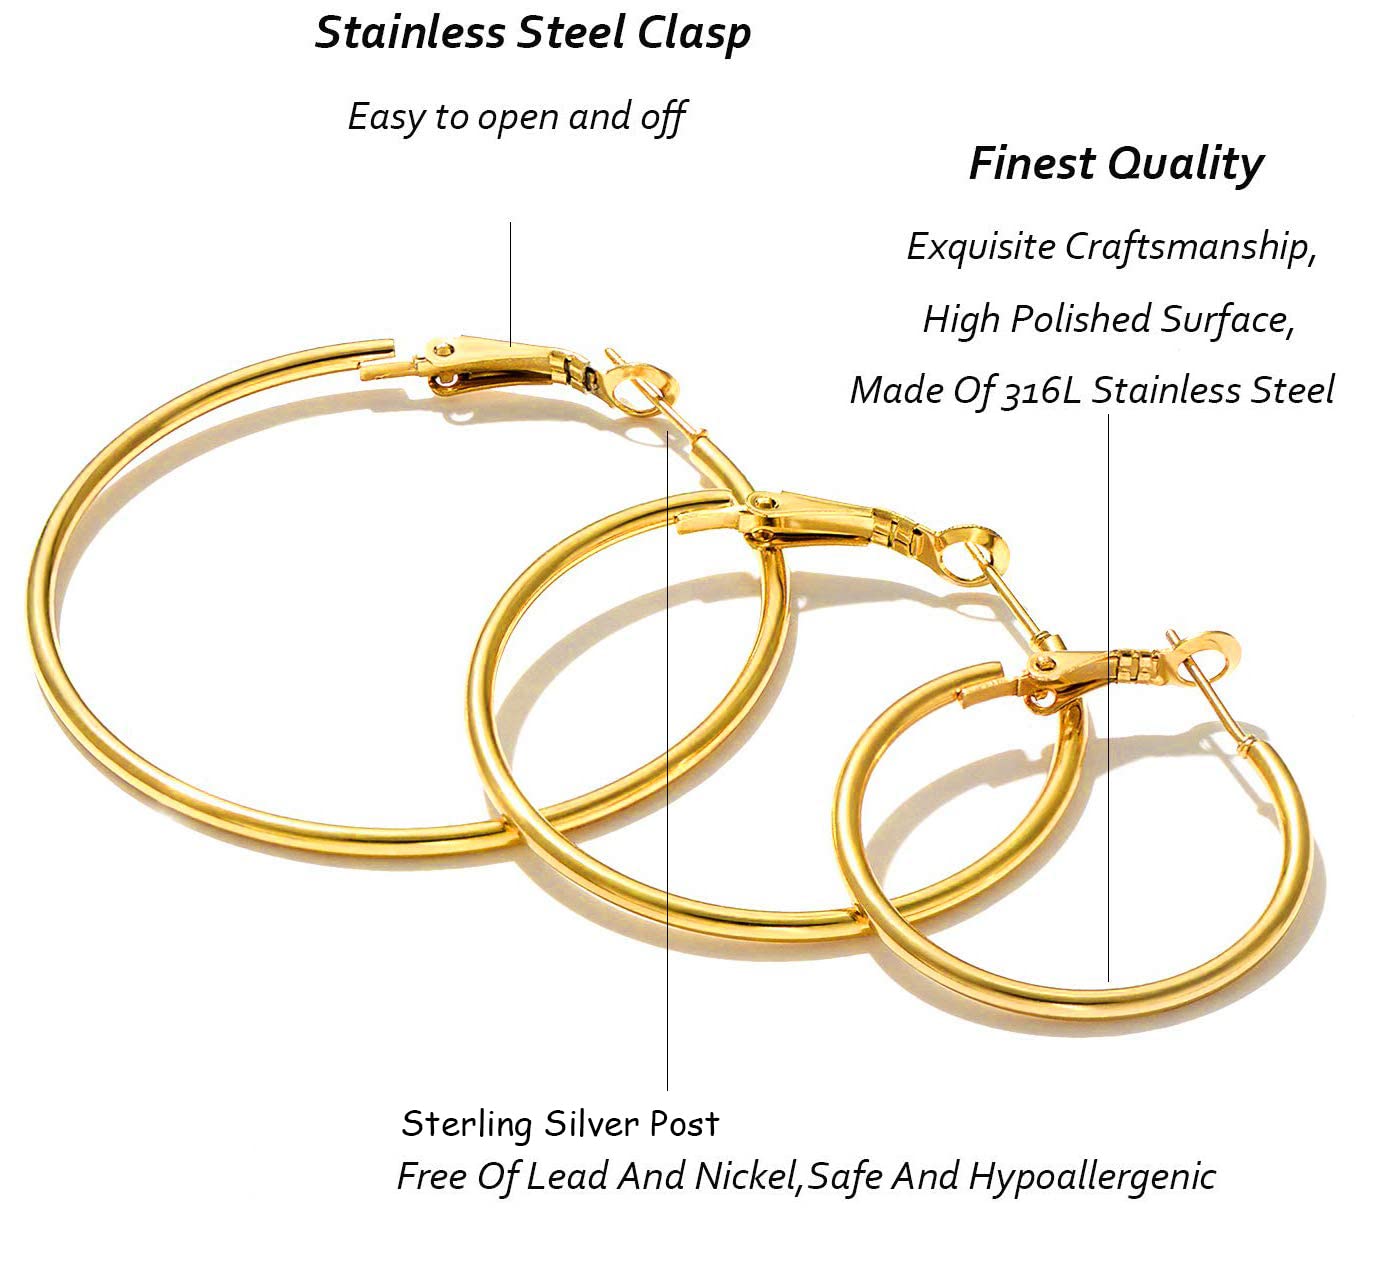 Cocamiky 9 Pairs Big Gold Hoop Earrings set for Women Girls,Stainless Steel 14K Gold Plated Thin Hoops Rose Gold Silver Hypoallergenic Sterling Silver Post for Sensitive Ears Jewelry